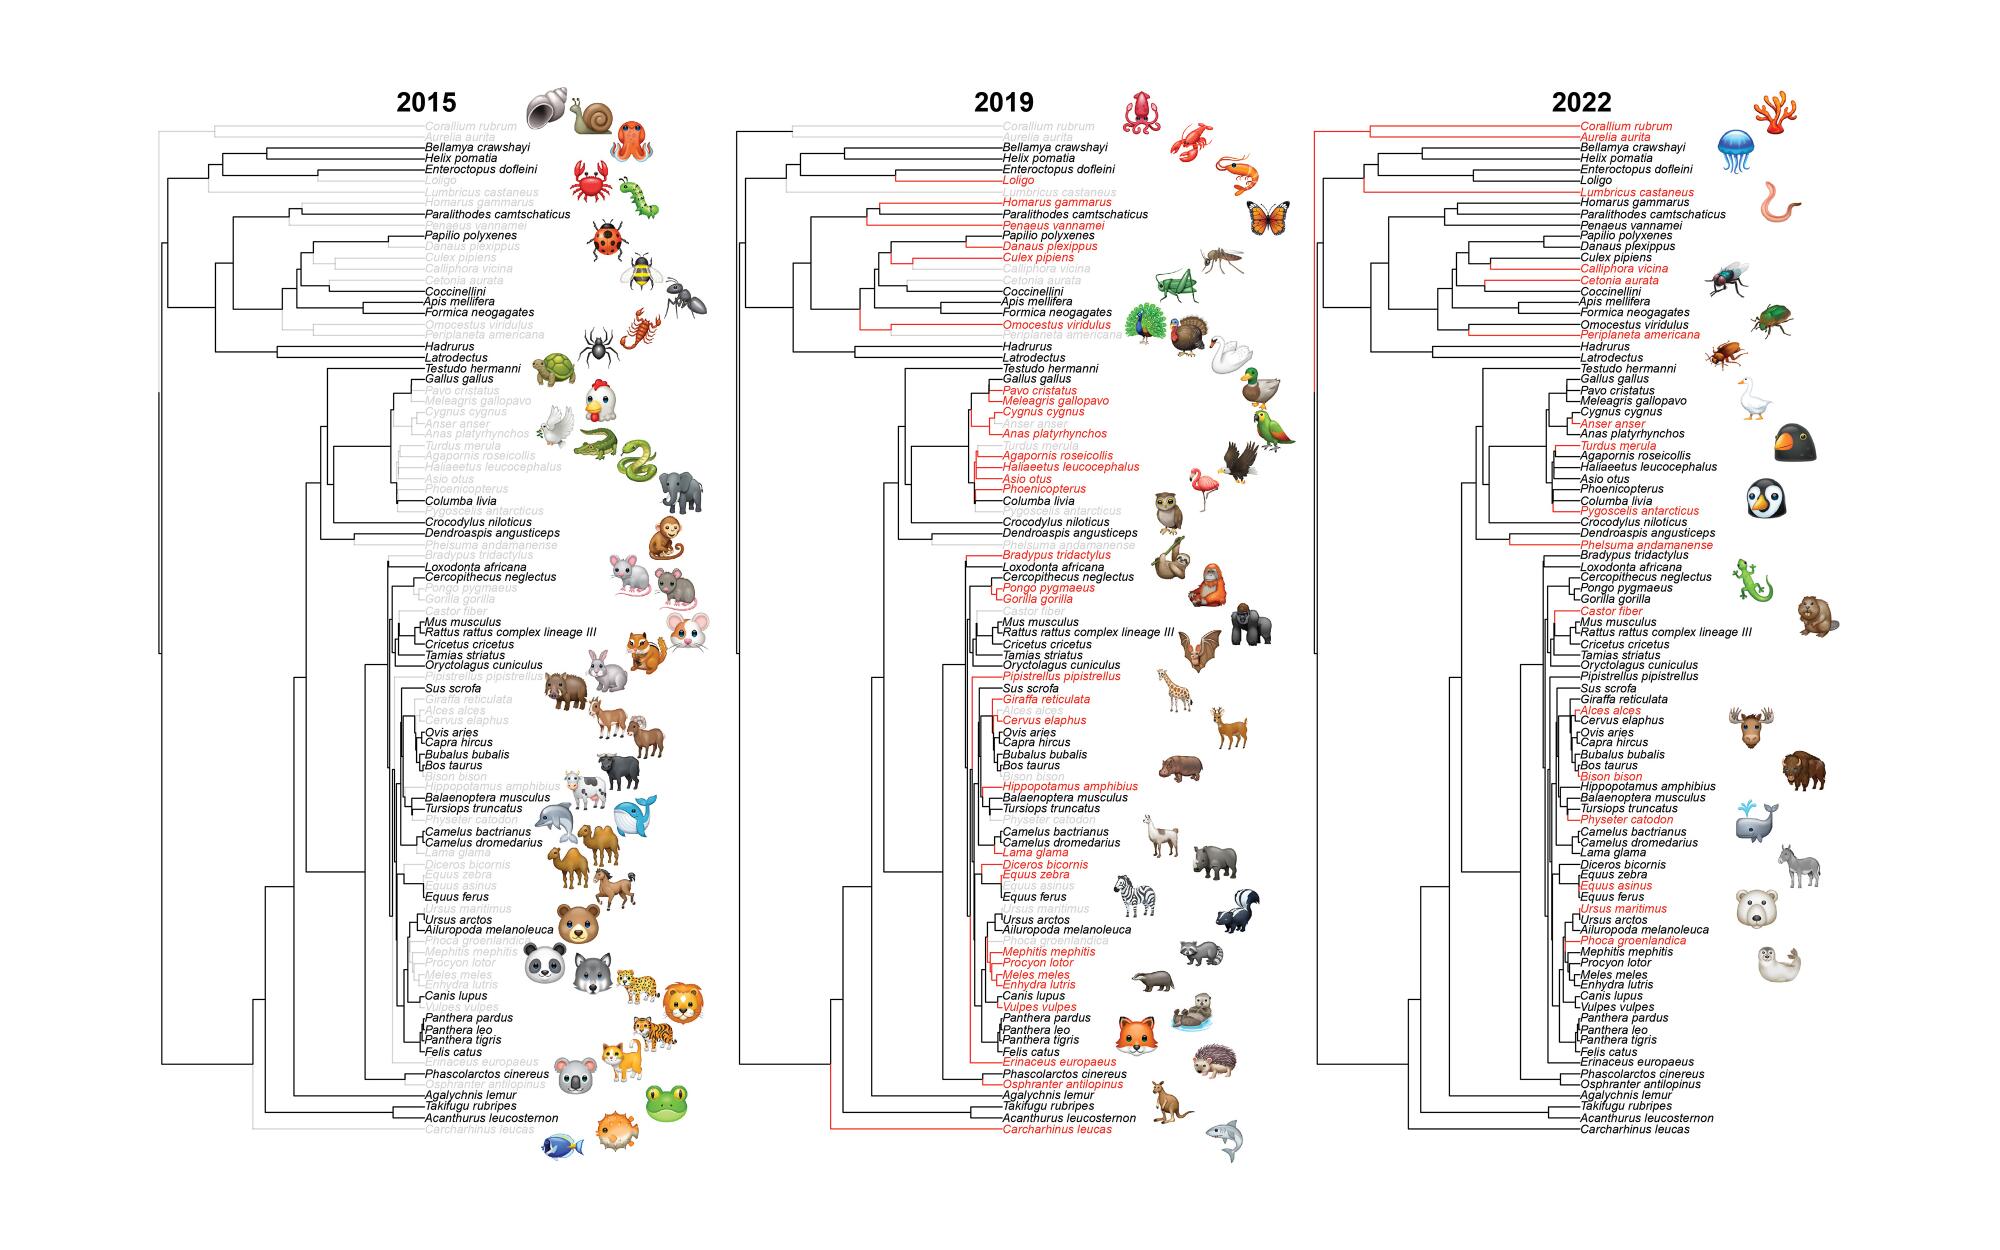 Three sets of phylogenetic trees show the nature-related emojis available in 2015, 2019 and 2022.